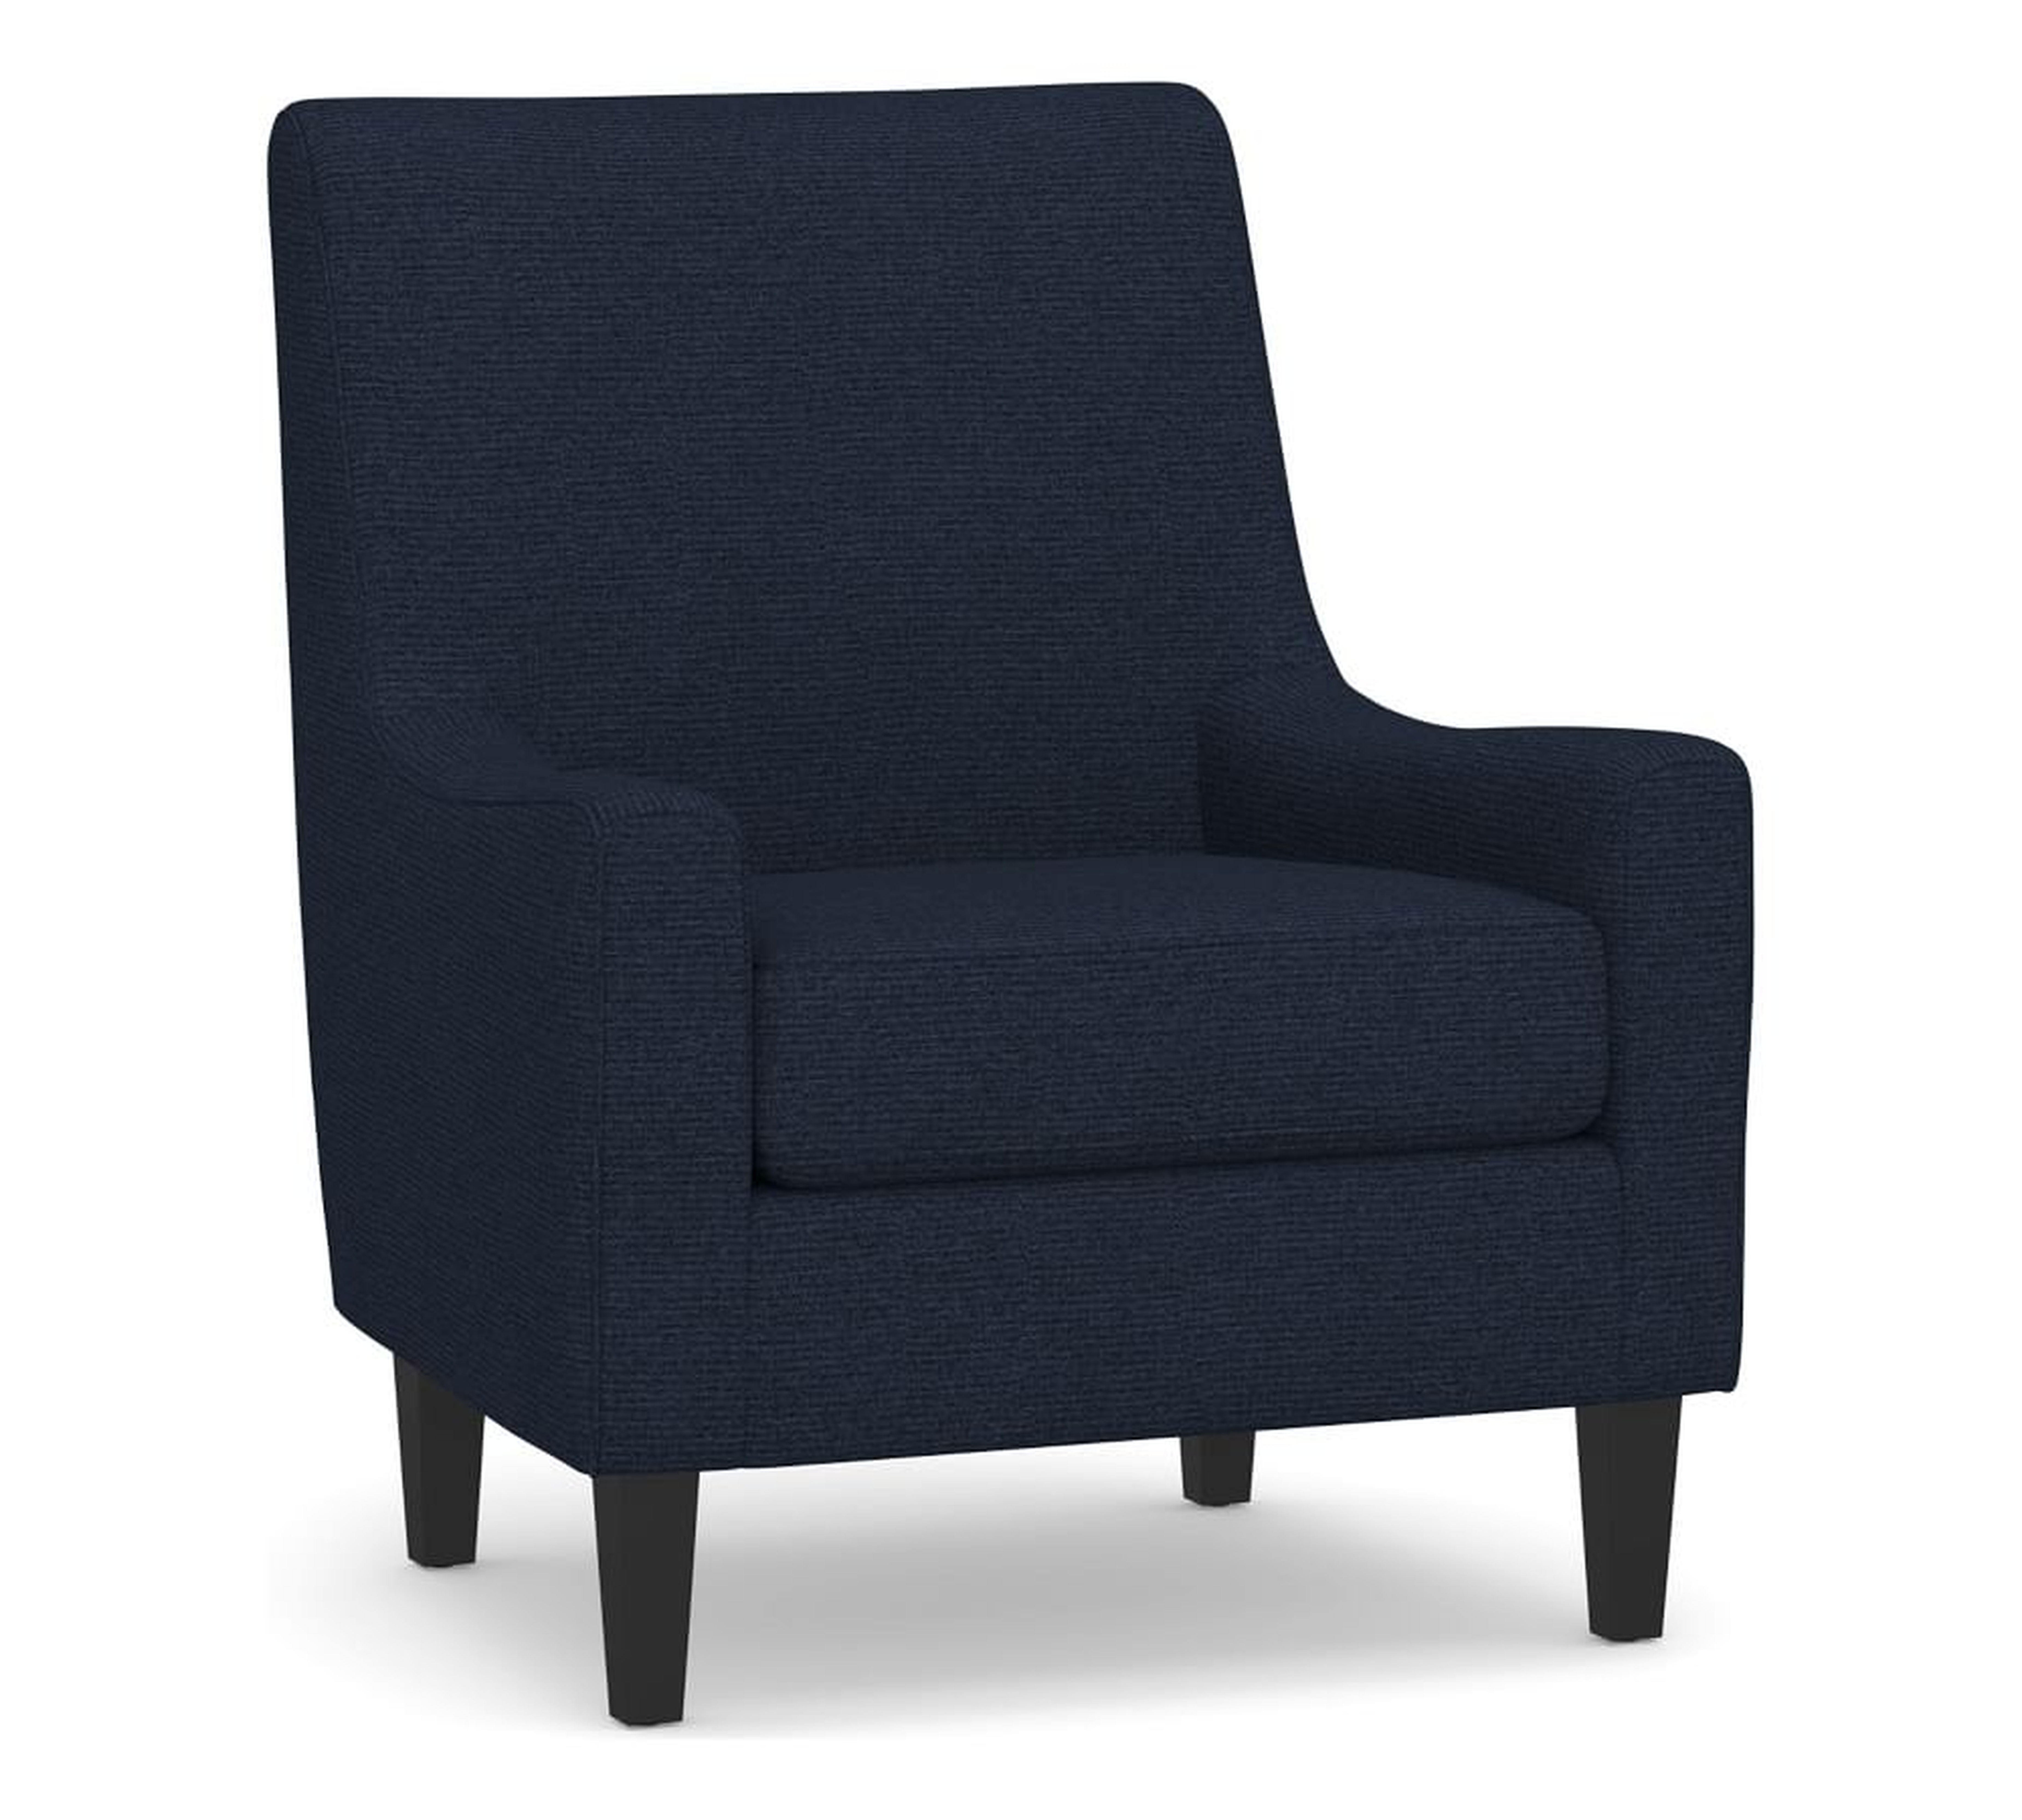 SoMa Isaac Upholstered Armchair, Polyester Wrapped Cushions, Performance Heathered Basketweave Navy - Pottery Barn